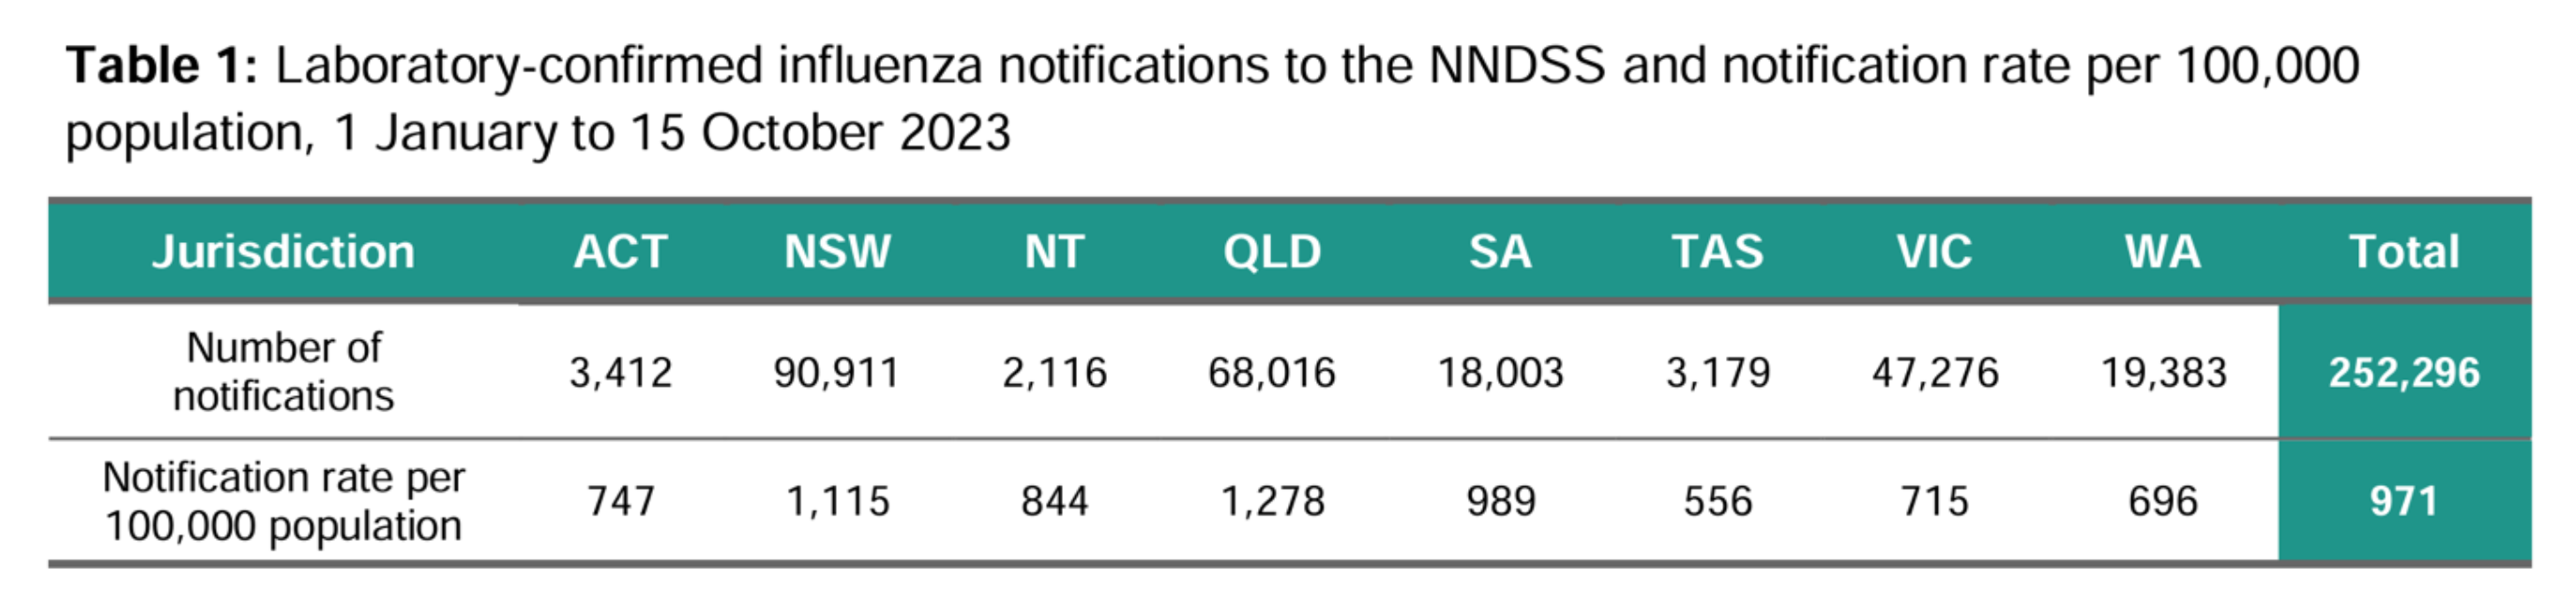 Lab-confirmed flu notifications to the NNDSS per 100,000, 1 January to 15 October 2023